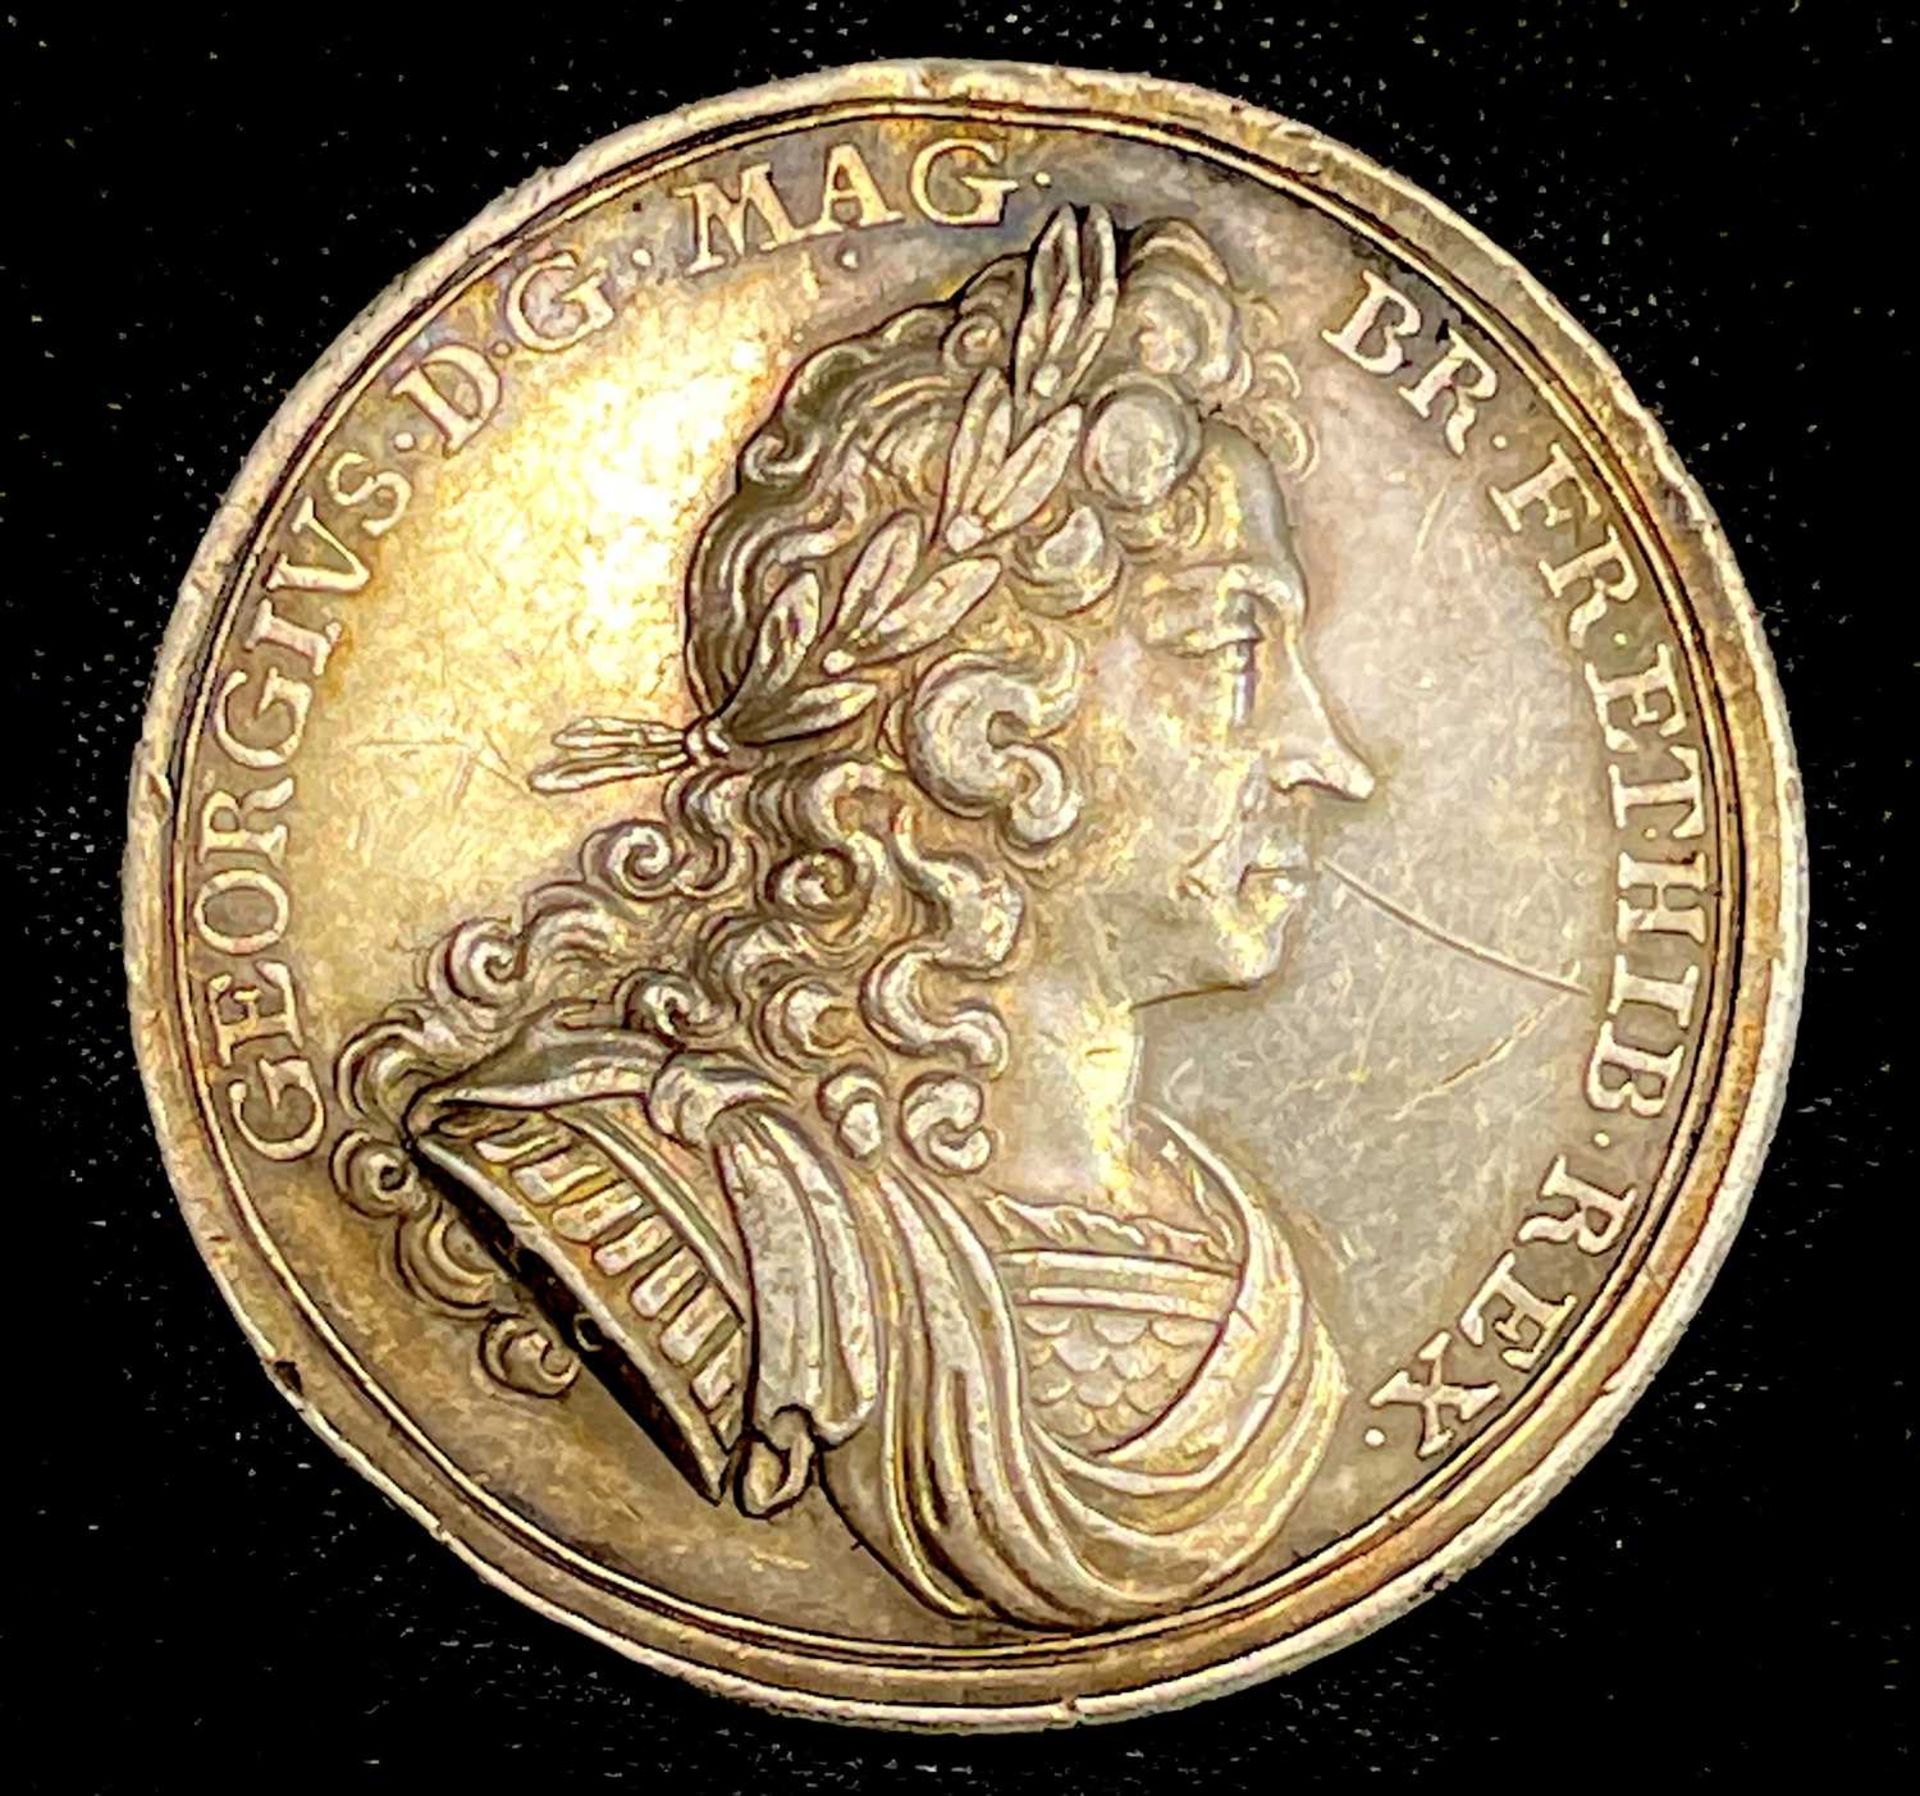 George I 1714 Silver Coronation Medallion. The medallion is in good condition for it's age. - Image 2 of 2